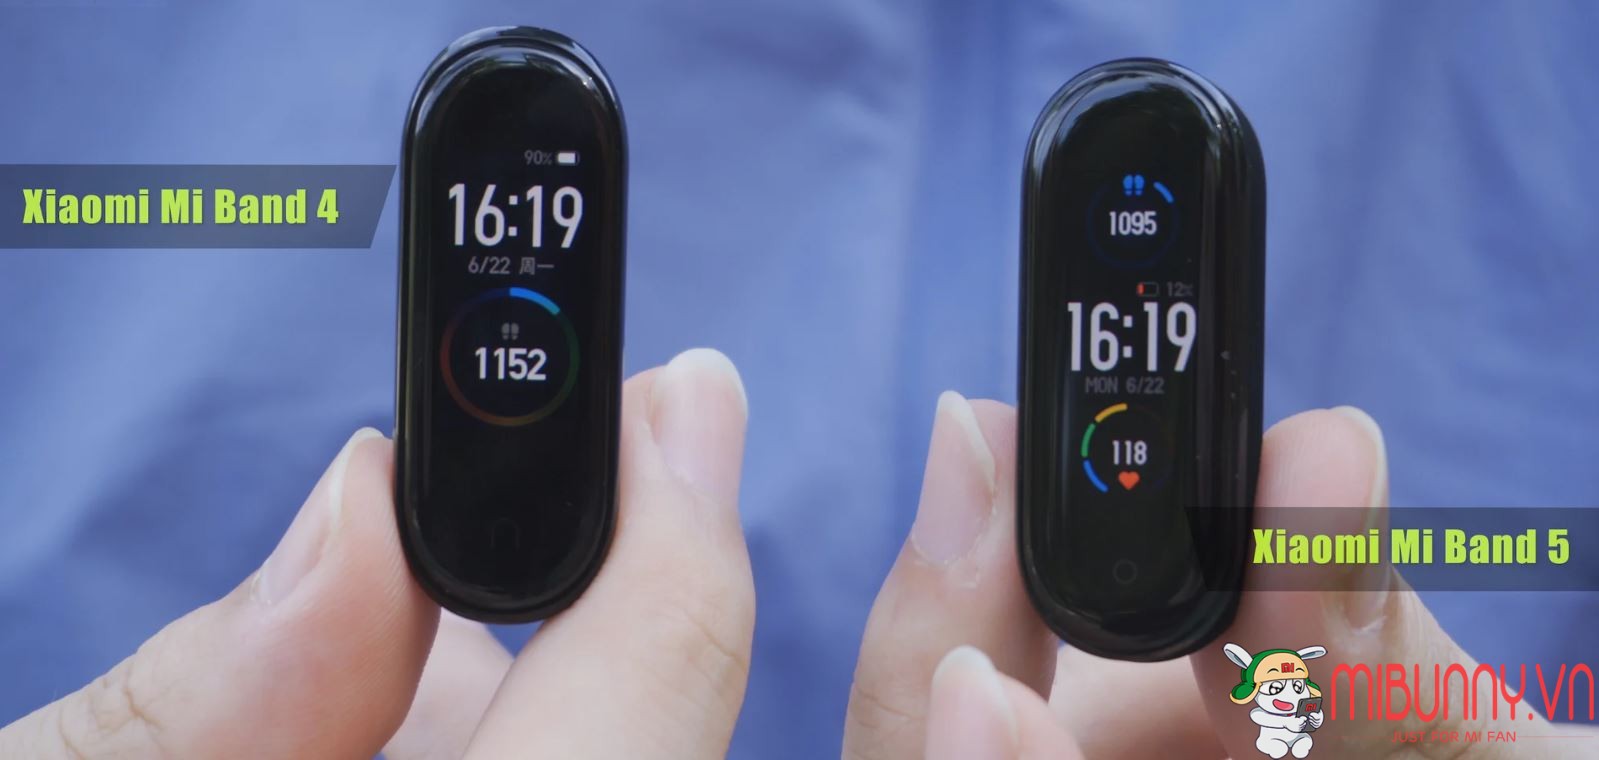 Xiaomi Mi Band 5 vs Mi Band 4: What's different | Wearables News